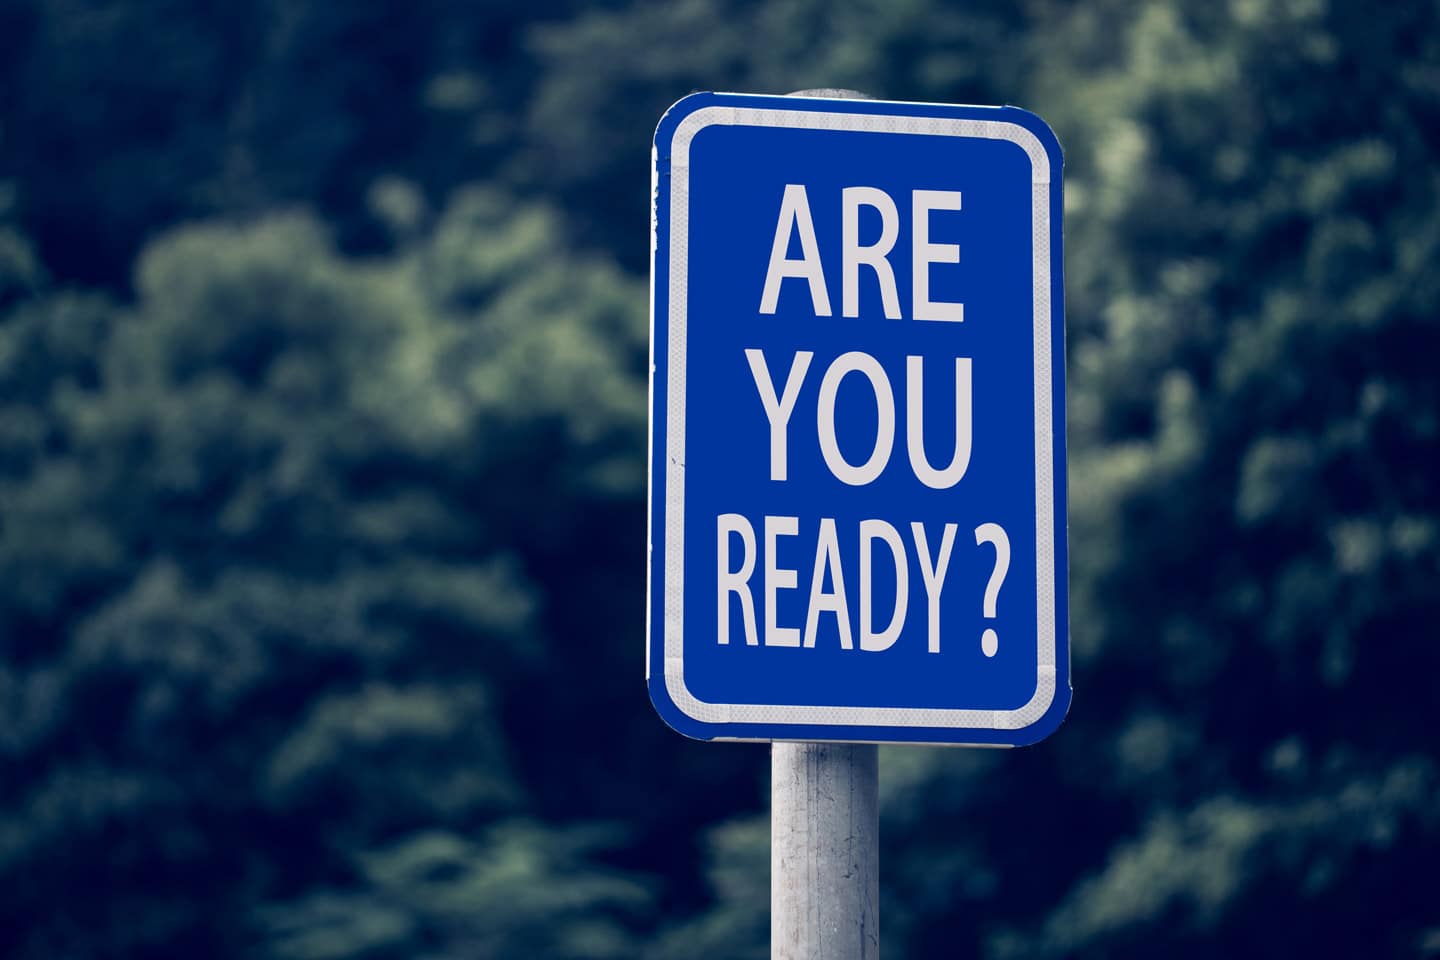 "Are you ready" sign